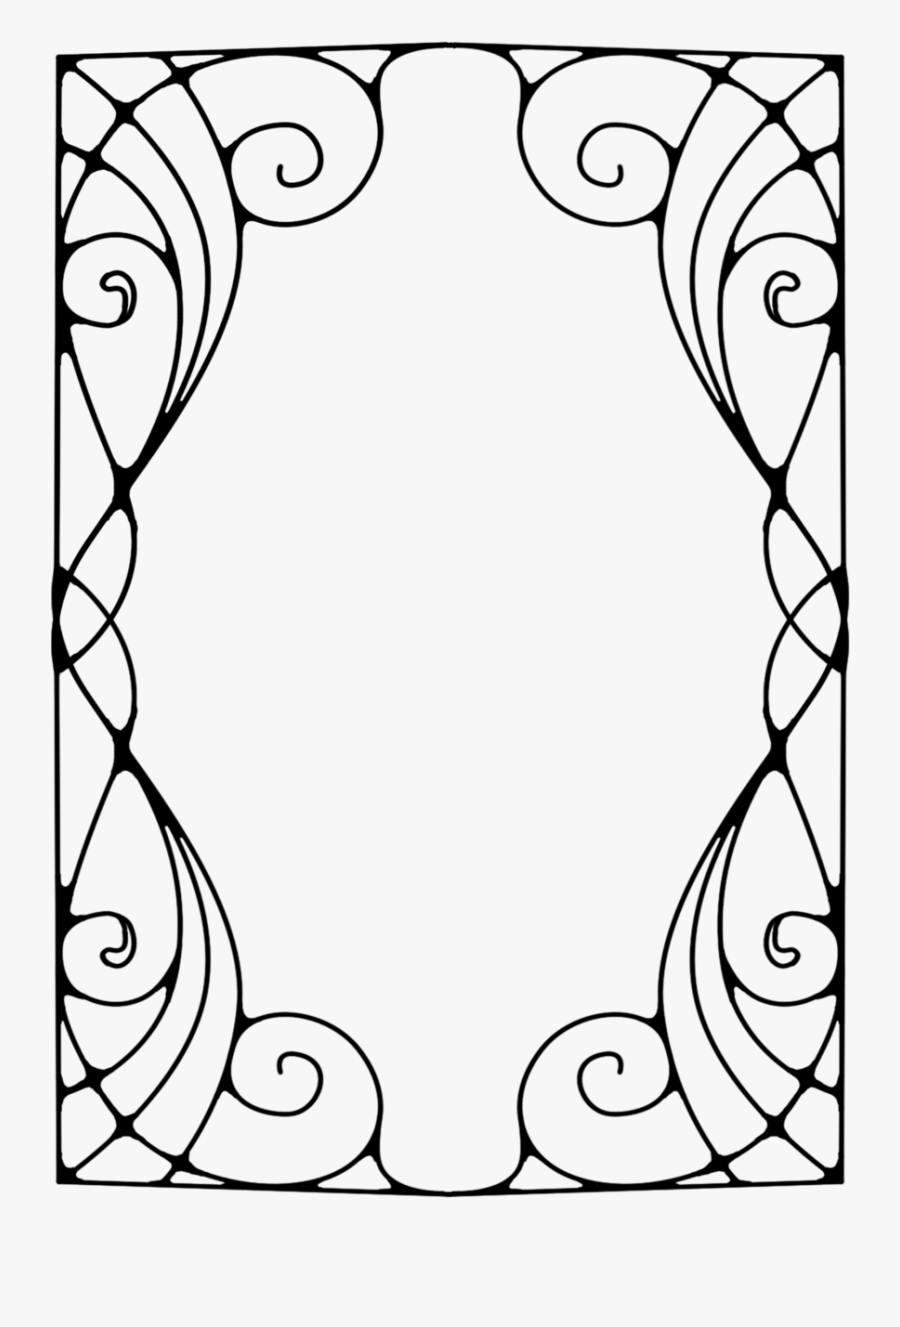 525 Nouveau Frame 12 By Tigers-stock On Clipart Library - Art Nouveau Frames Png, Transparent Clipart